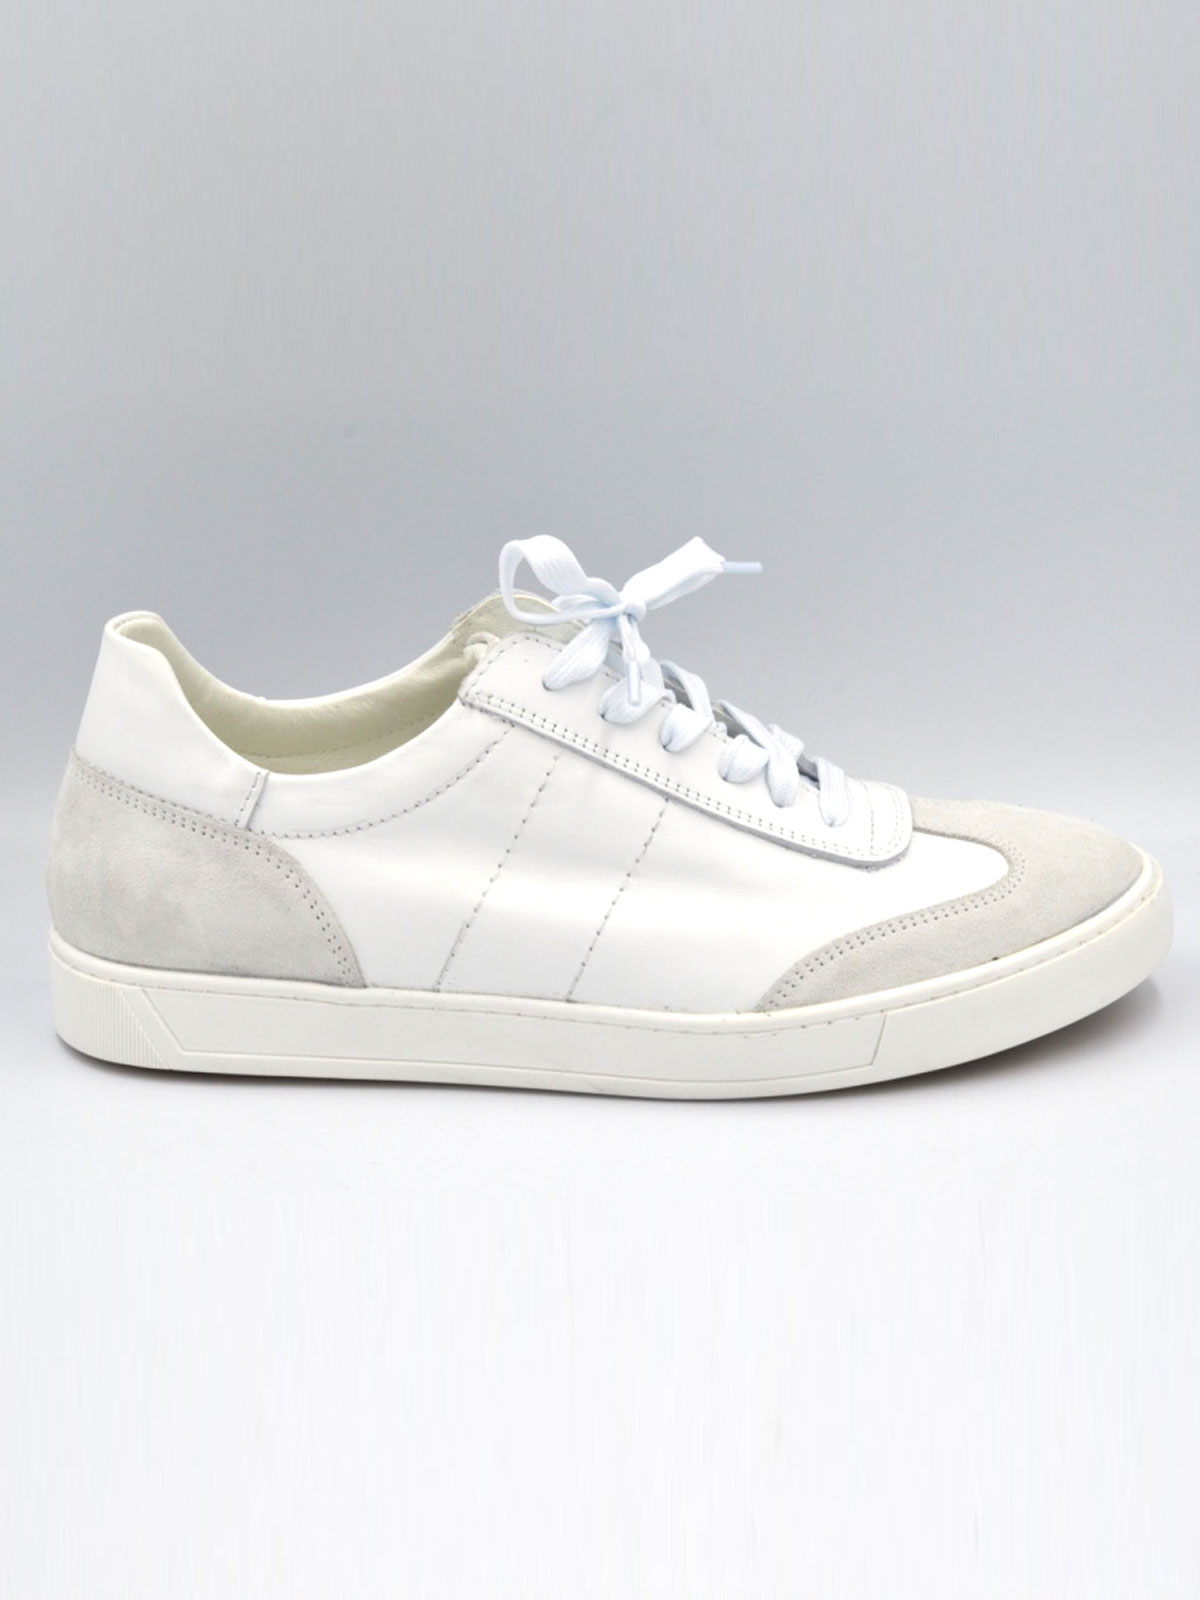 White leather sneakers - 81103 - € 78.18 img2